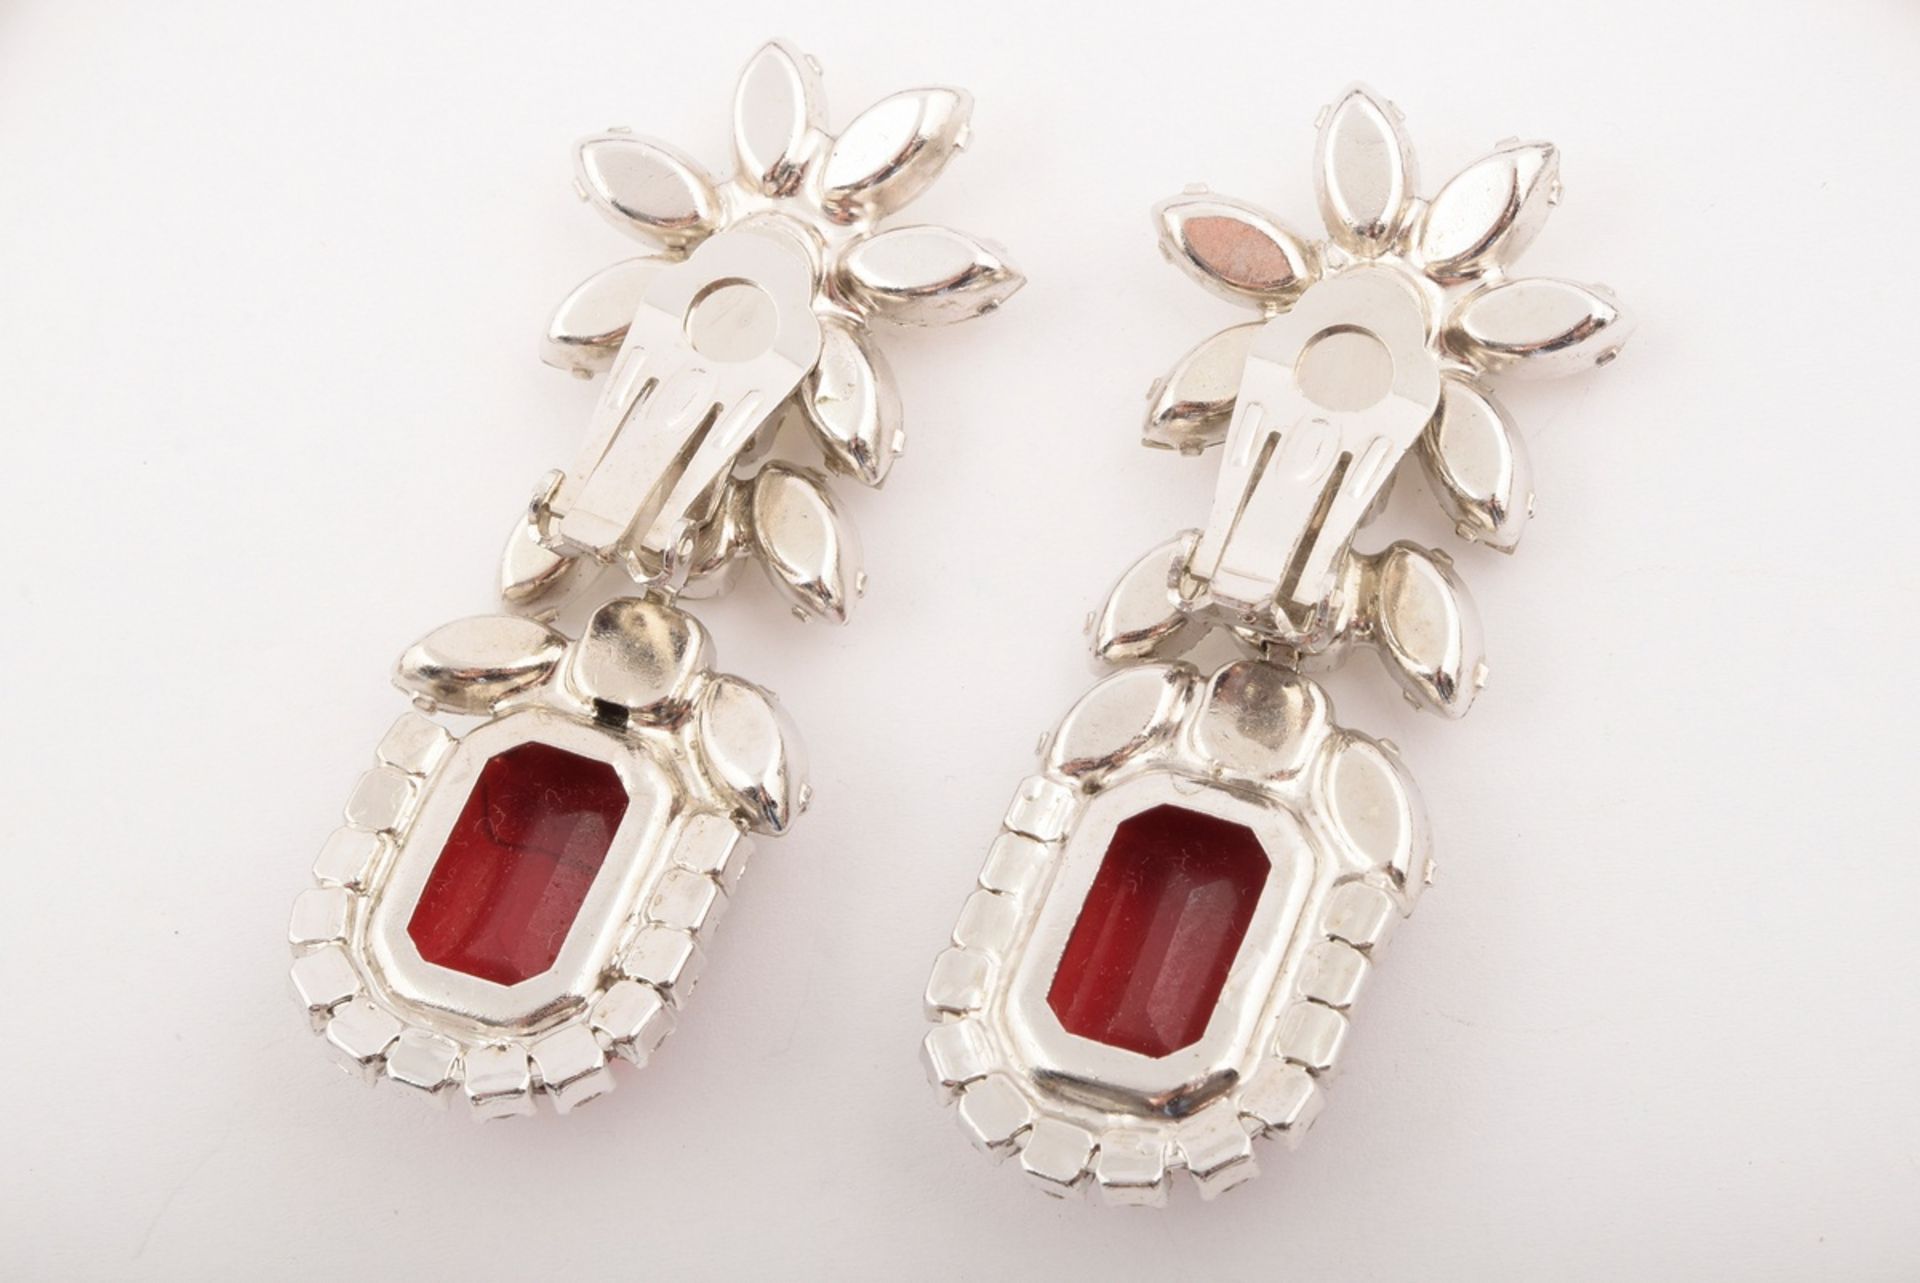 3 pieces of opulent Midcentury costume jewellery made of white metal with red and white rhinestones - Image 4 of 5